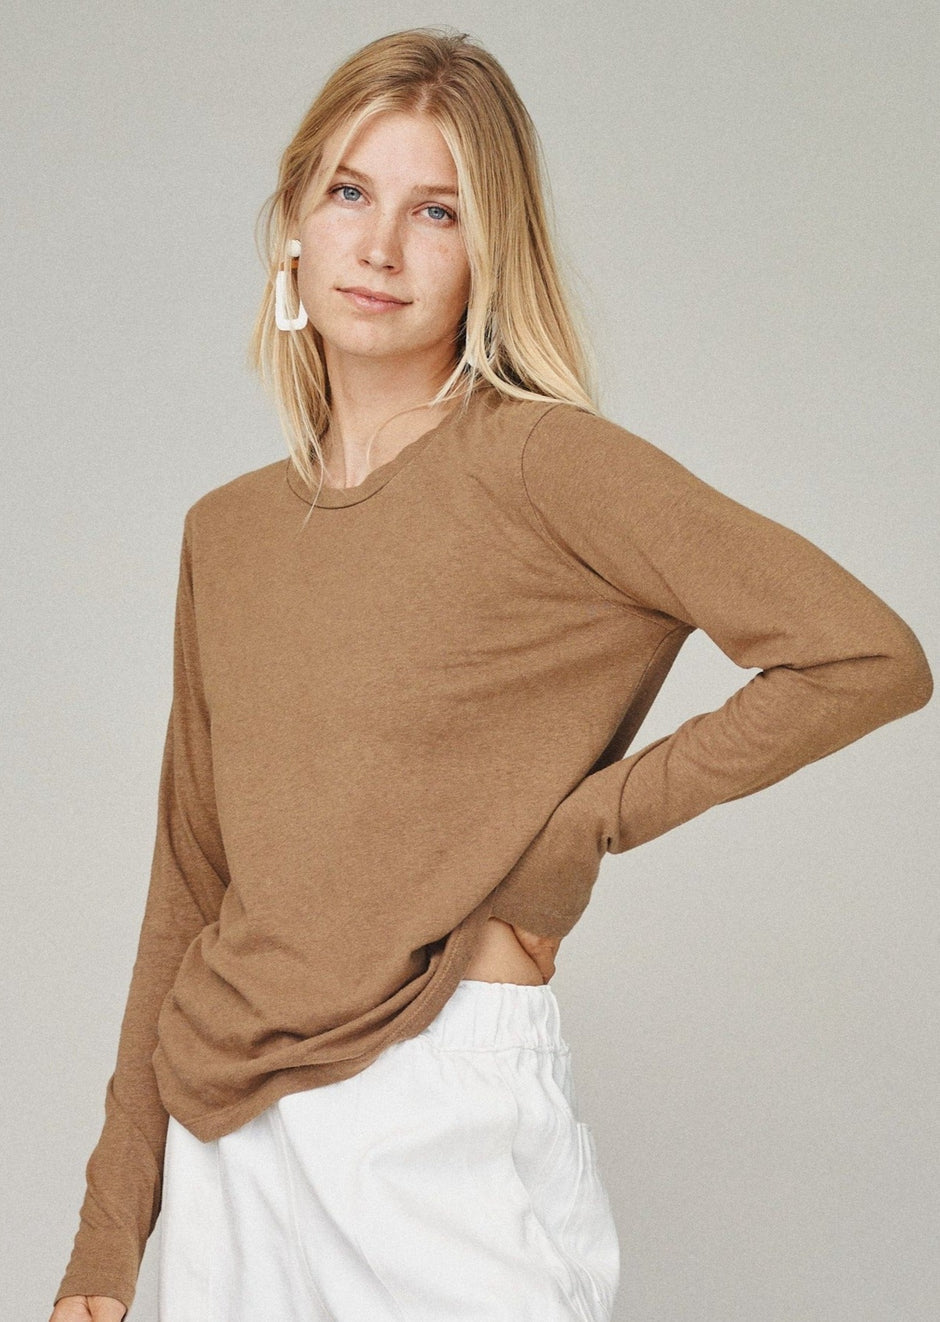 Made from a perfectly weighted hemp blend in the same flattering chic silhouette as our best selling Lorel Tee but with full-length sleeves. Super soft with a slightly textured finish, it's the perfect anytime layering piece all year round.